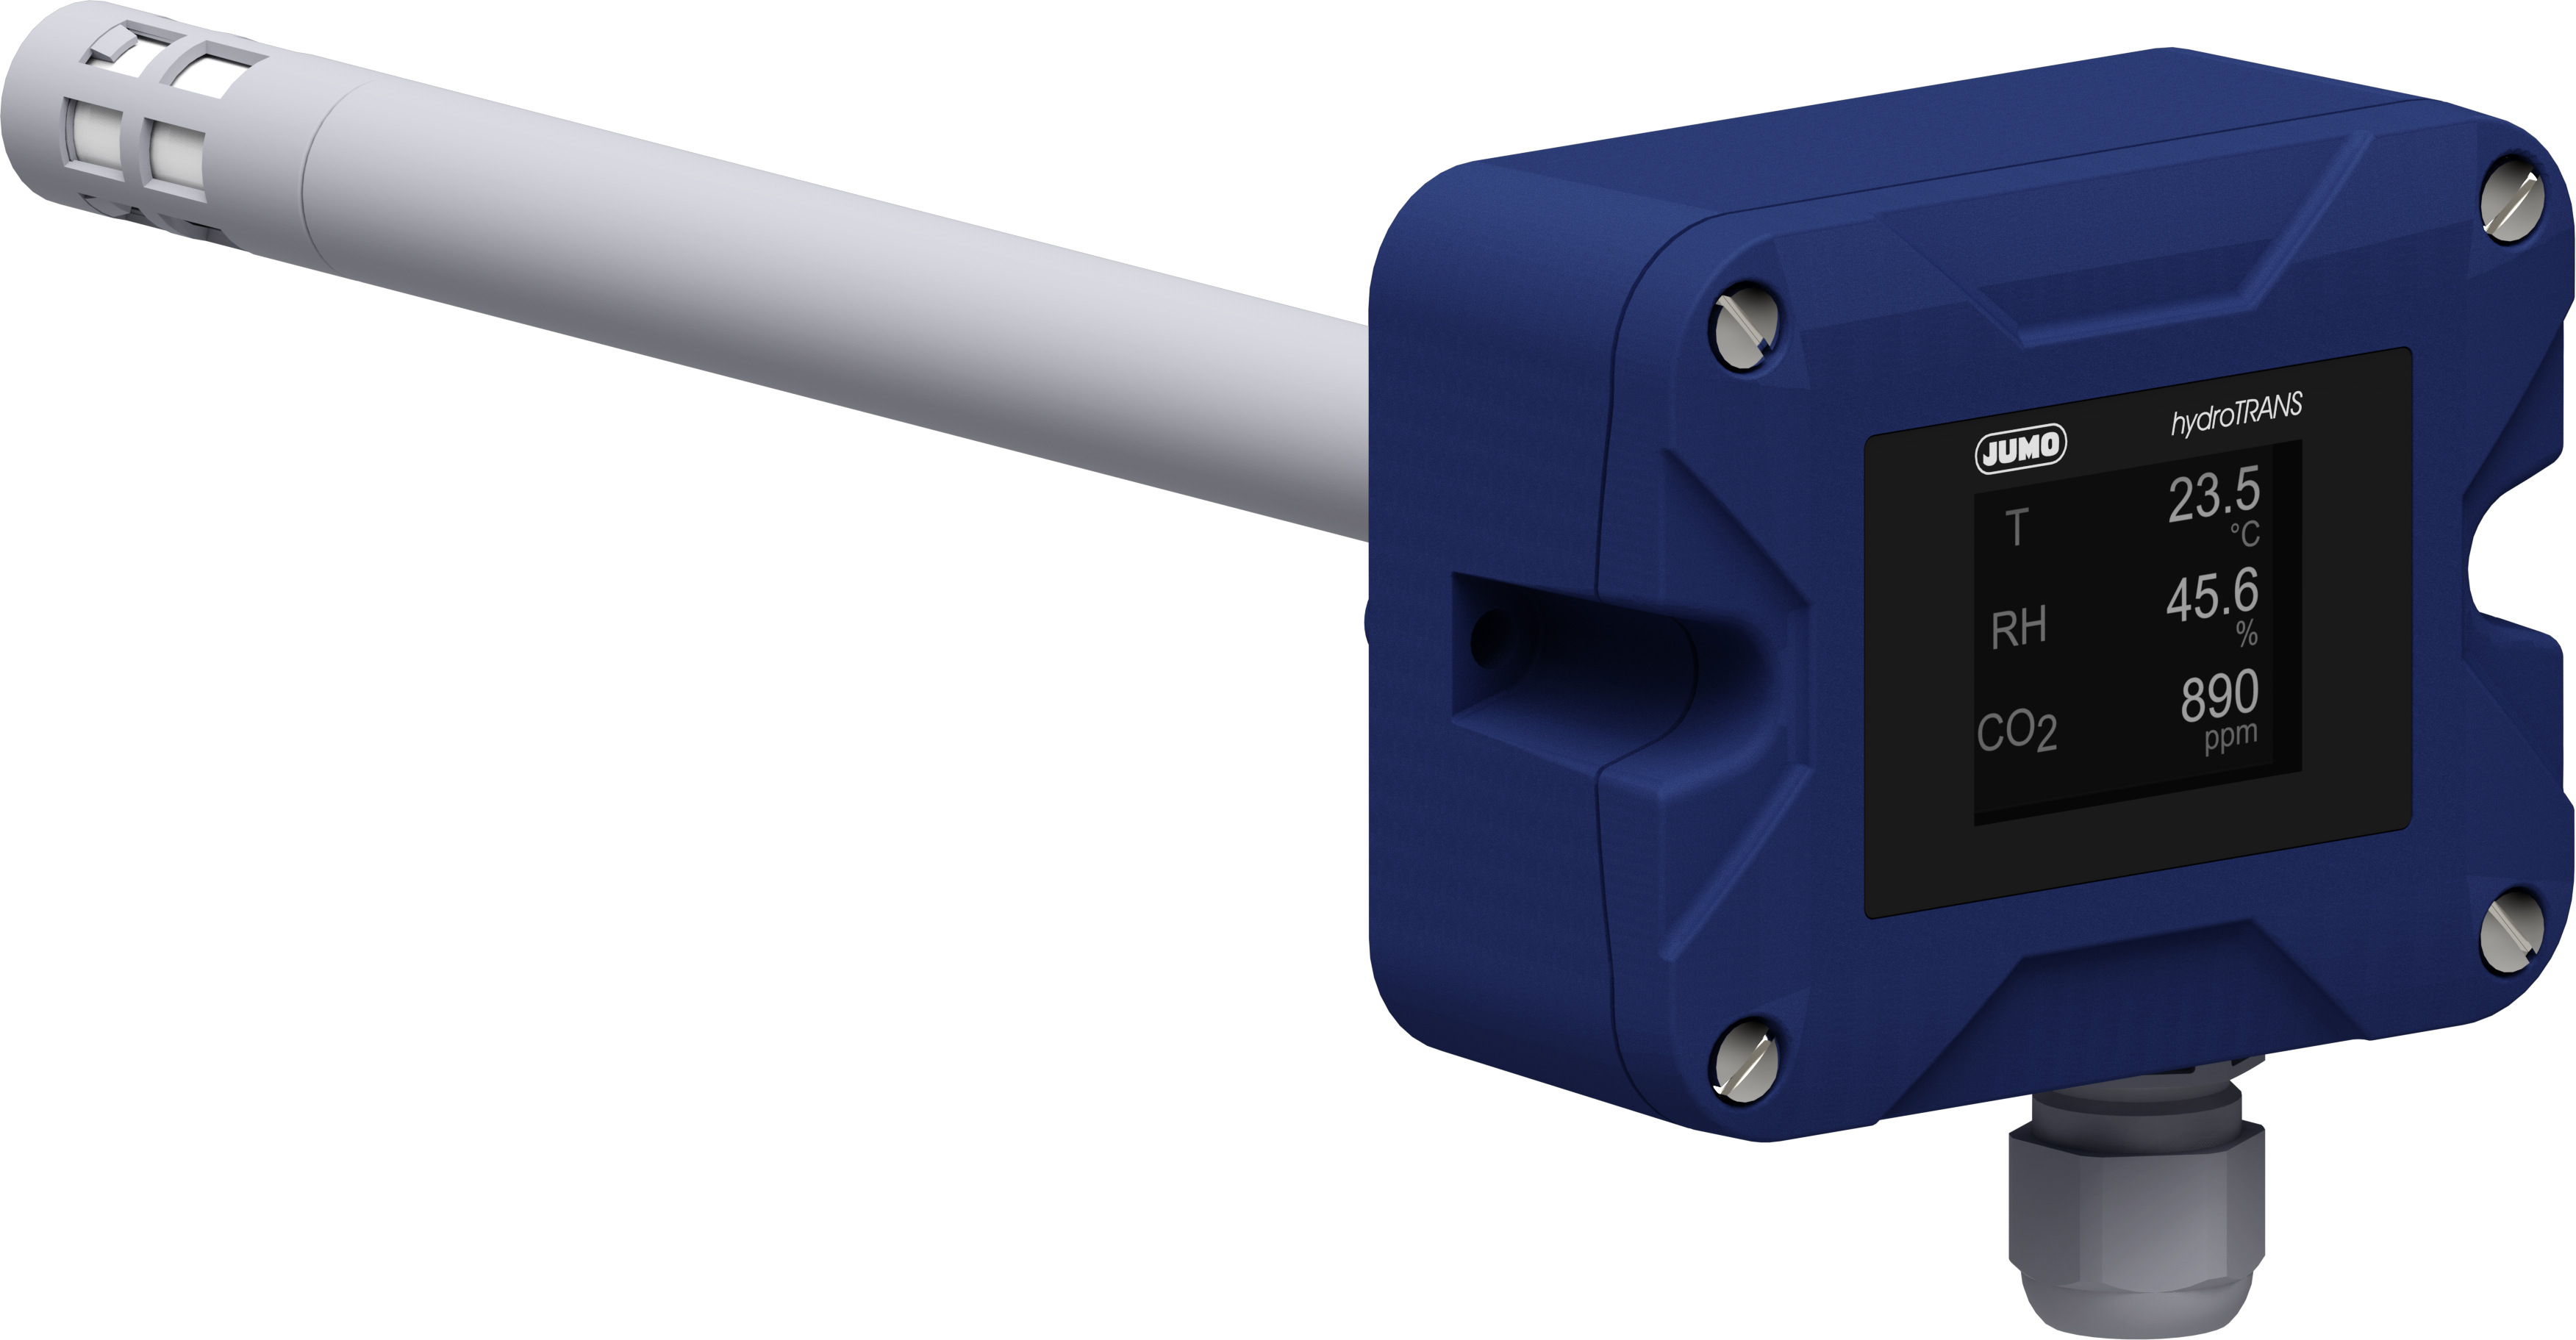 JUMO hydroTRANS S30 - Humidity and temperature transmitter with optional CO2 module in duct design